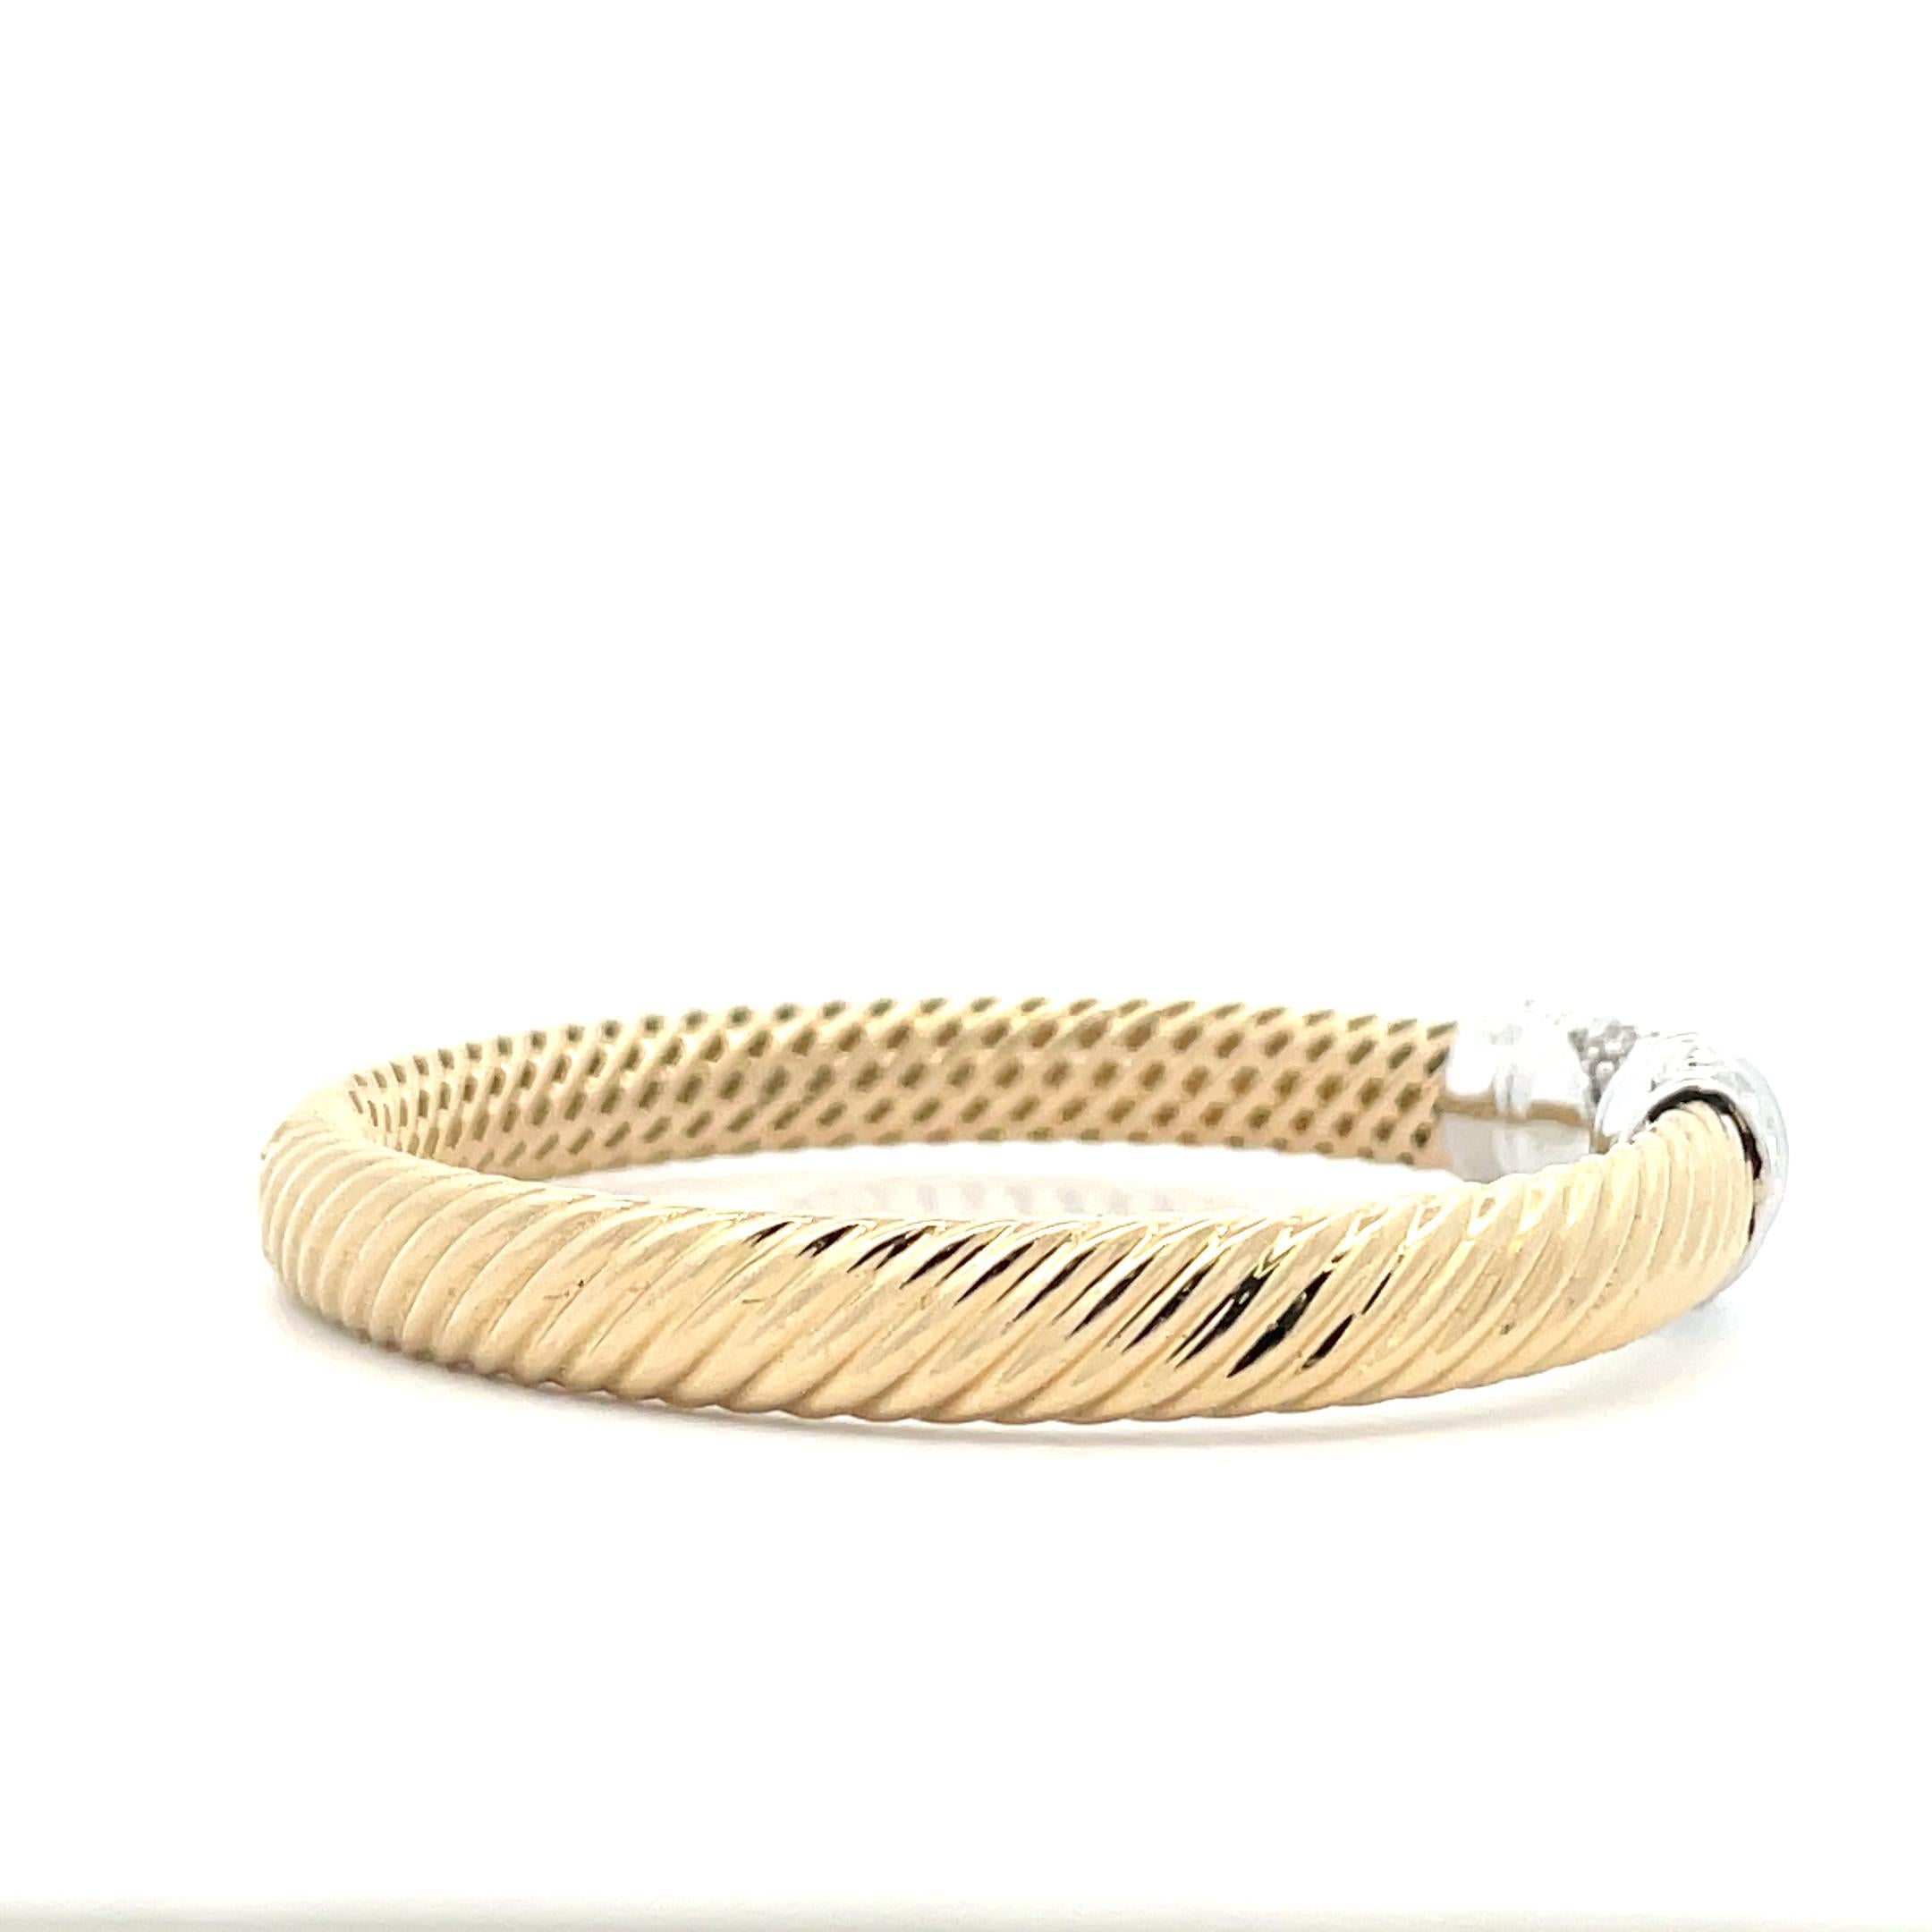 This sculpted bangle of solid 14K gold has been carved with a cable motif, adding subtle movement to this timeless design. The ends of each bangle have been decorated with cluster of white diamonds for added sparkle. Wear it alone or with other